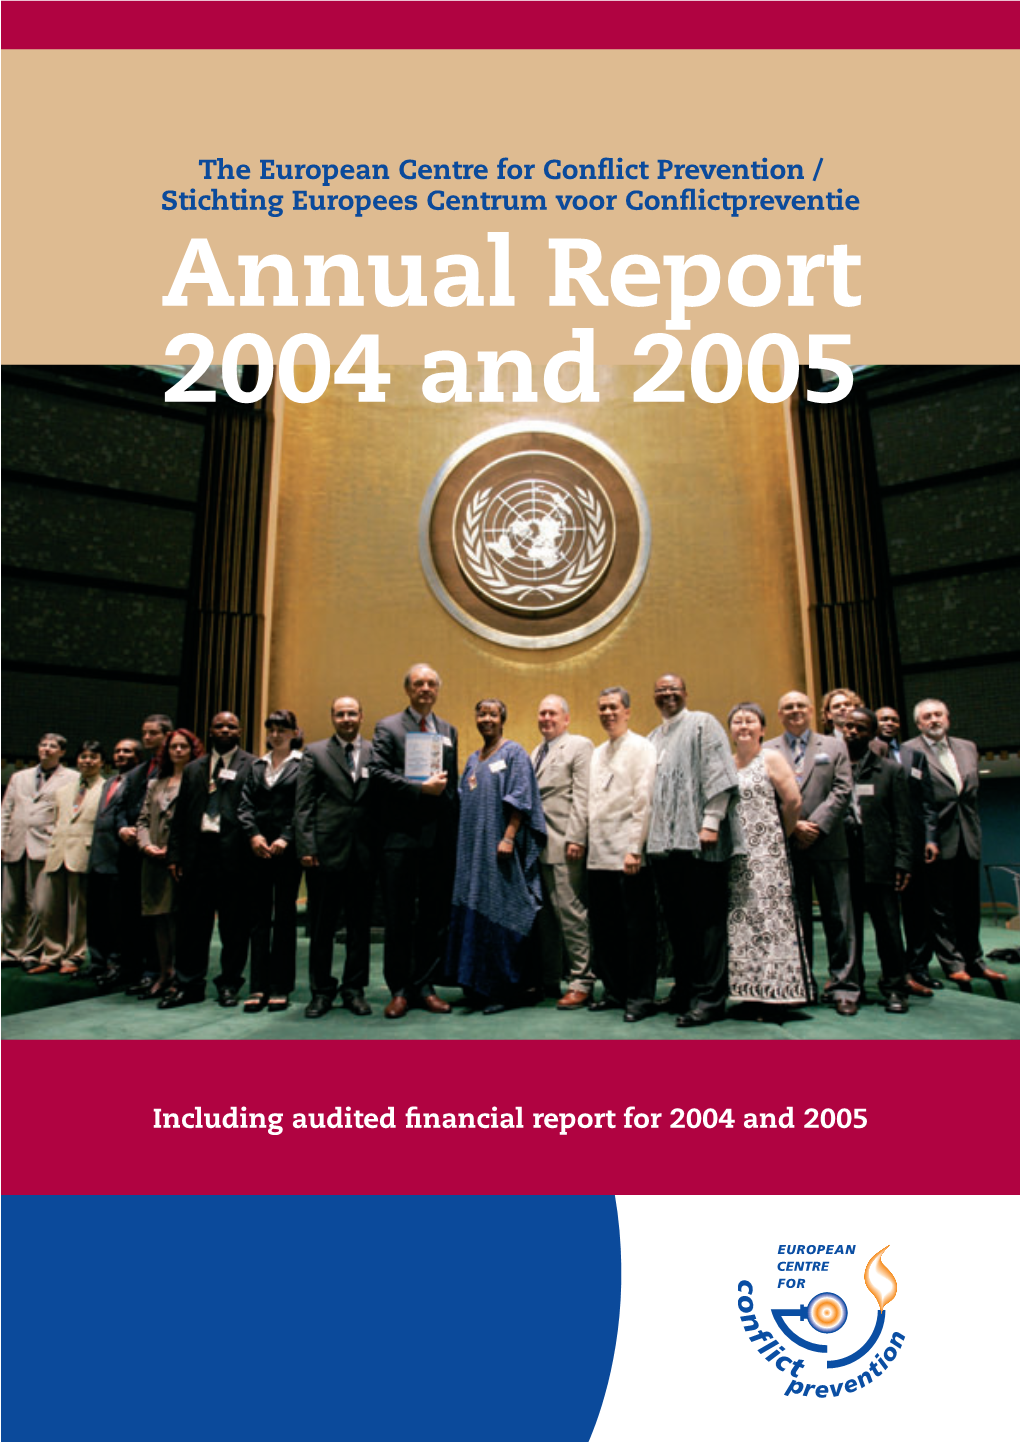 Annual Report 2004 and 2005